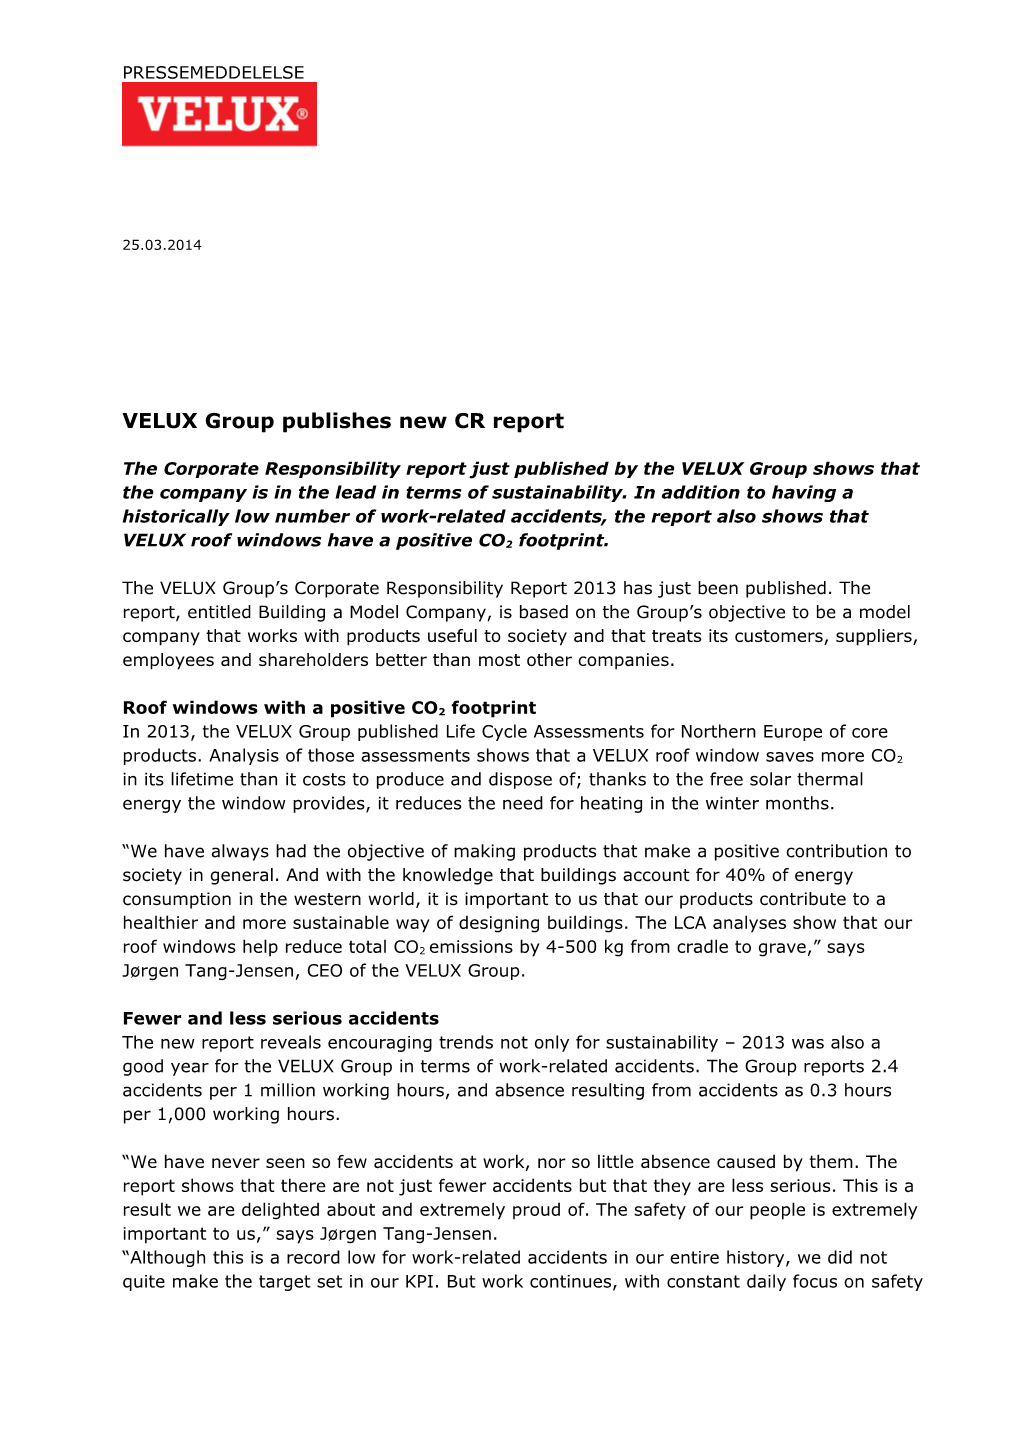 VELUX Group Publishes New CR Report